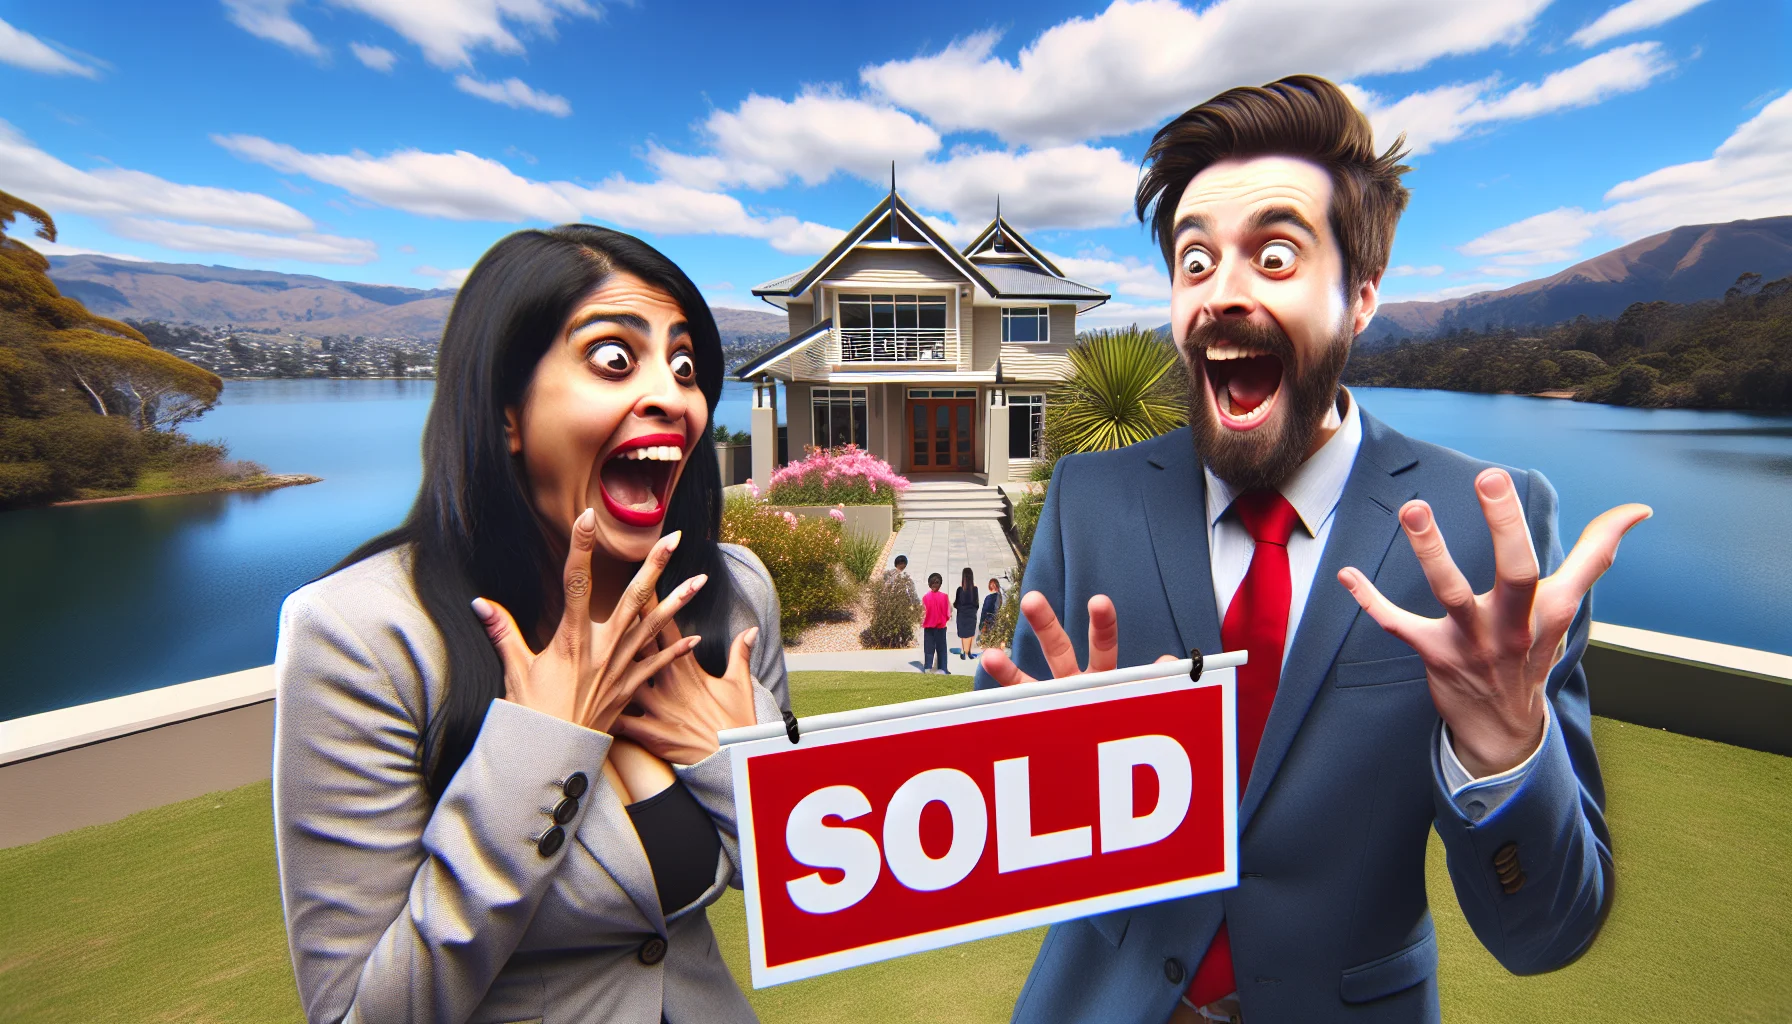 Create a humorous and realistic image of a South Asian woman and a Caucasian man expressing excitement as they purchase their second home, which is set to be their primary residence. The house should be idyllically positioned in an optimal real-estate location, such as by a serene lake with gorgeous views. Their joy should be evident by a big red SOLD sign, the presence of a very satisfied Middle Eastern real estate agent, and their faces filled with absolute delight. The background should be a sunny day, blue skies filled with fluffy clouds, a beautiful garden, and a friendly neighborhood.